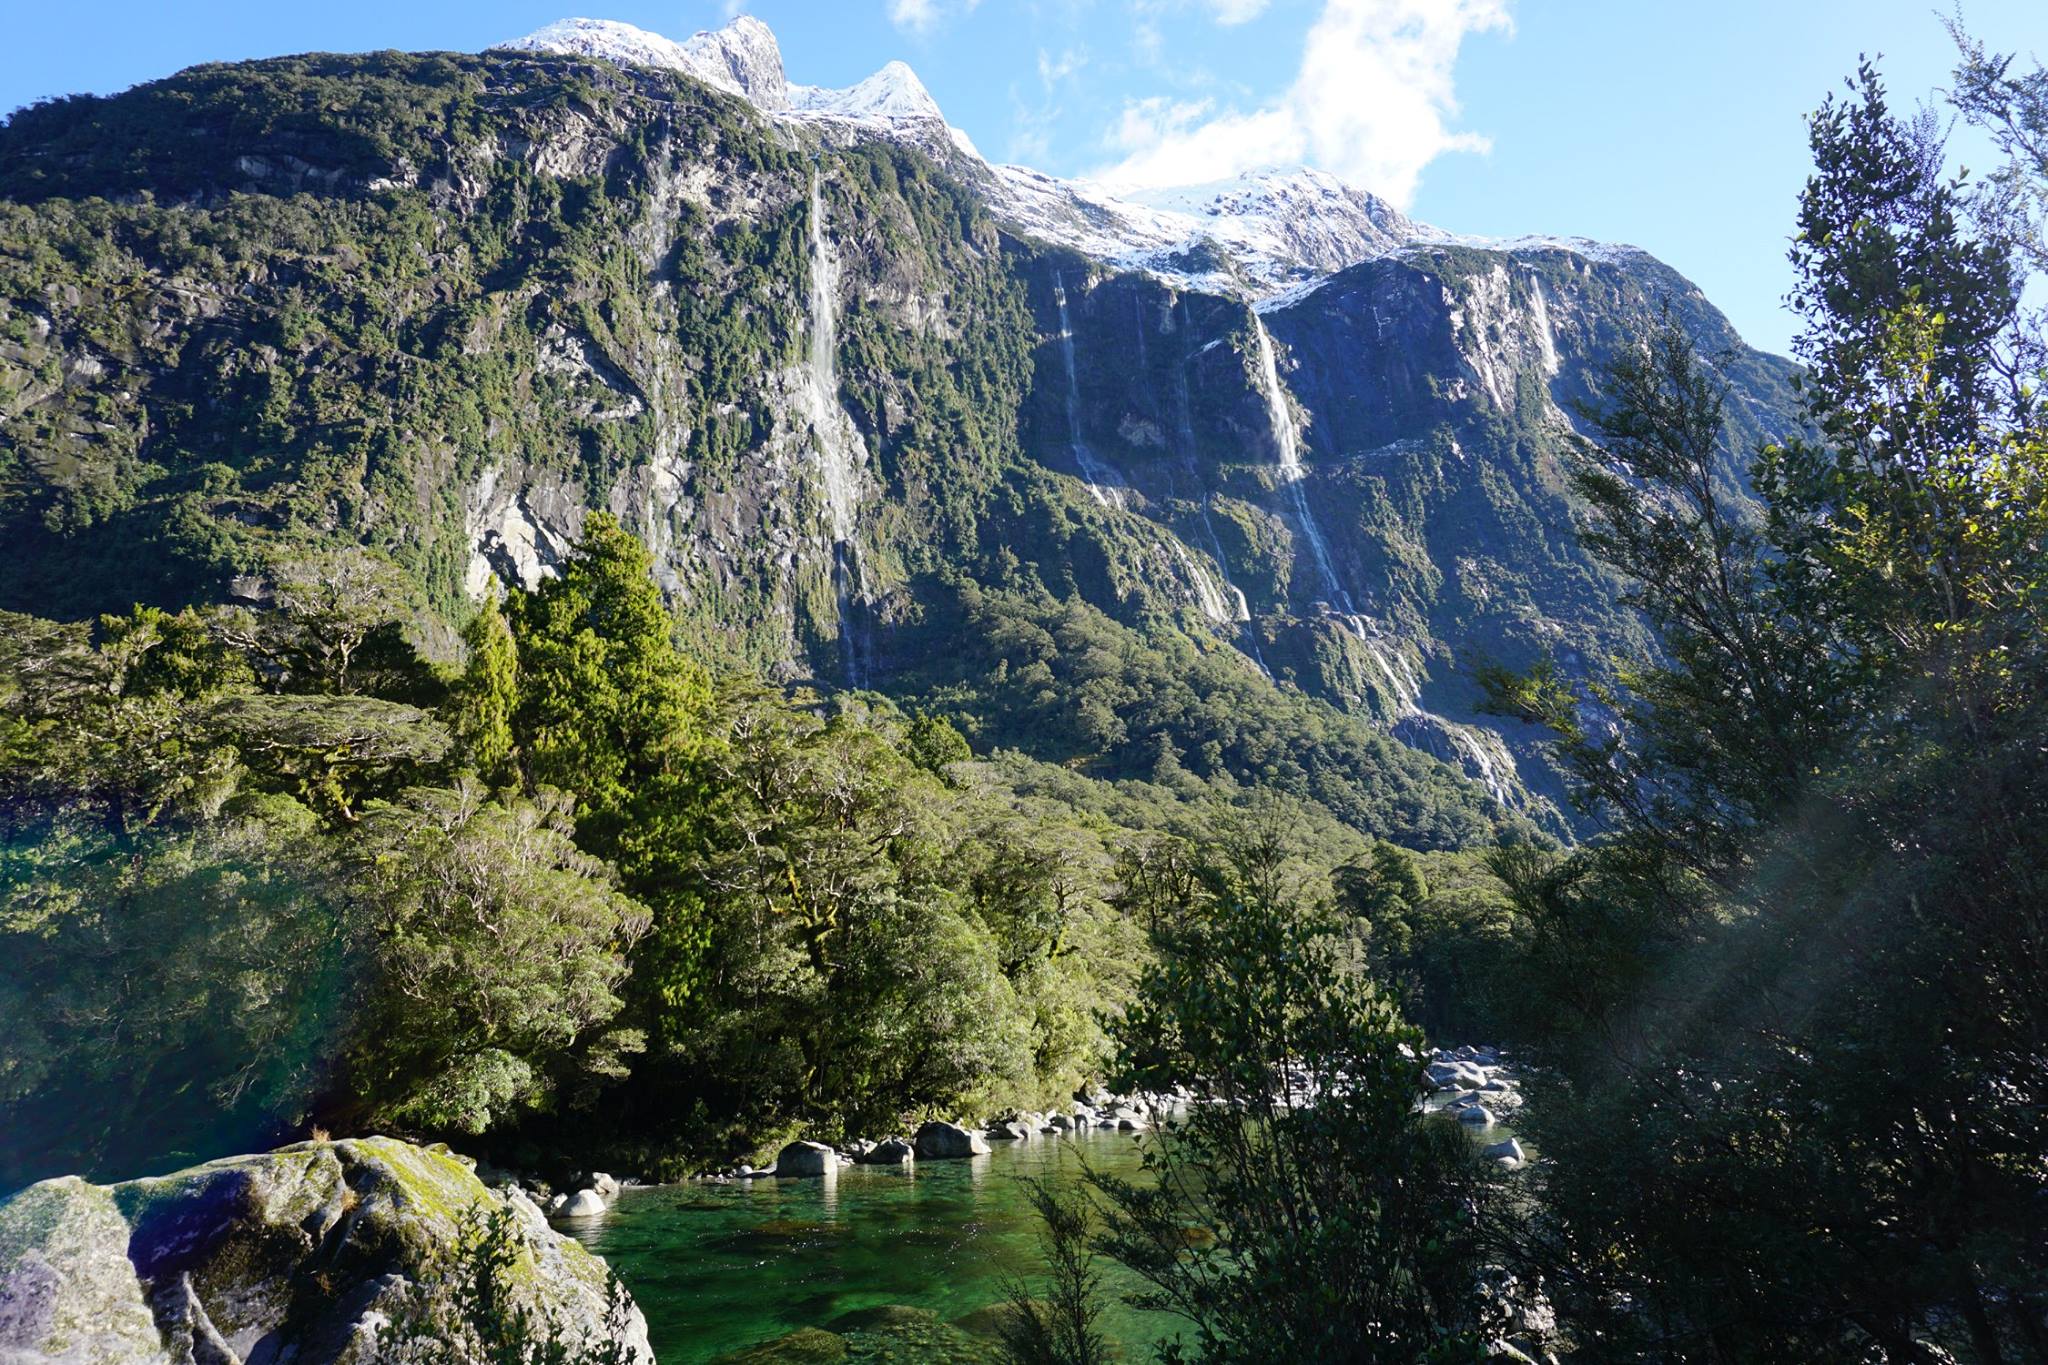 Milford sound. The waterfalls and lush green landscapes take your breath away.